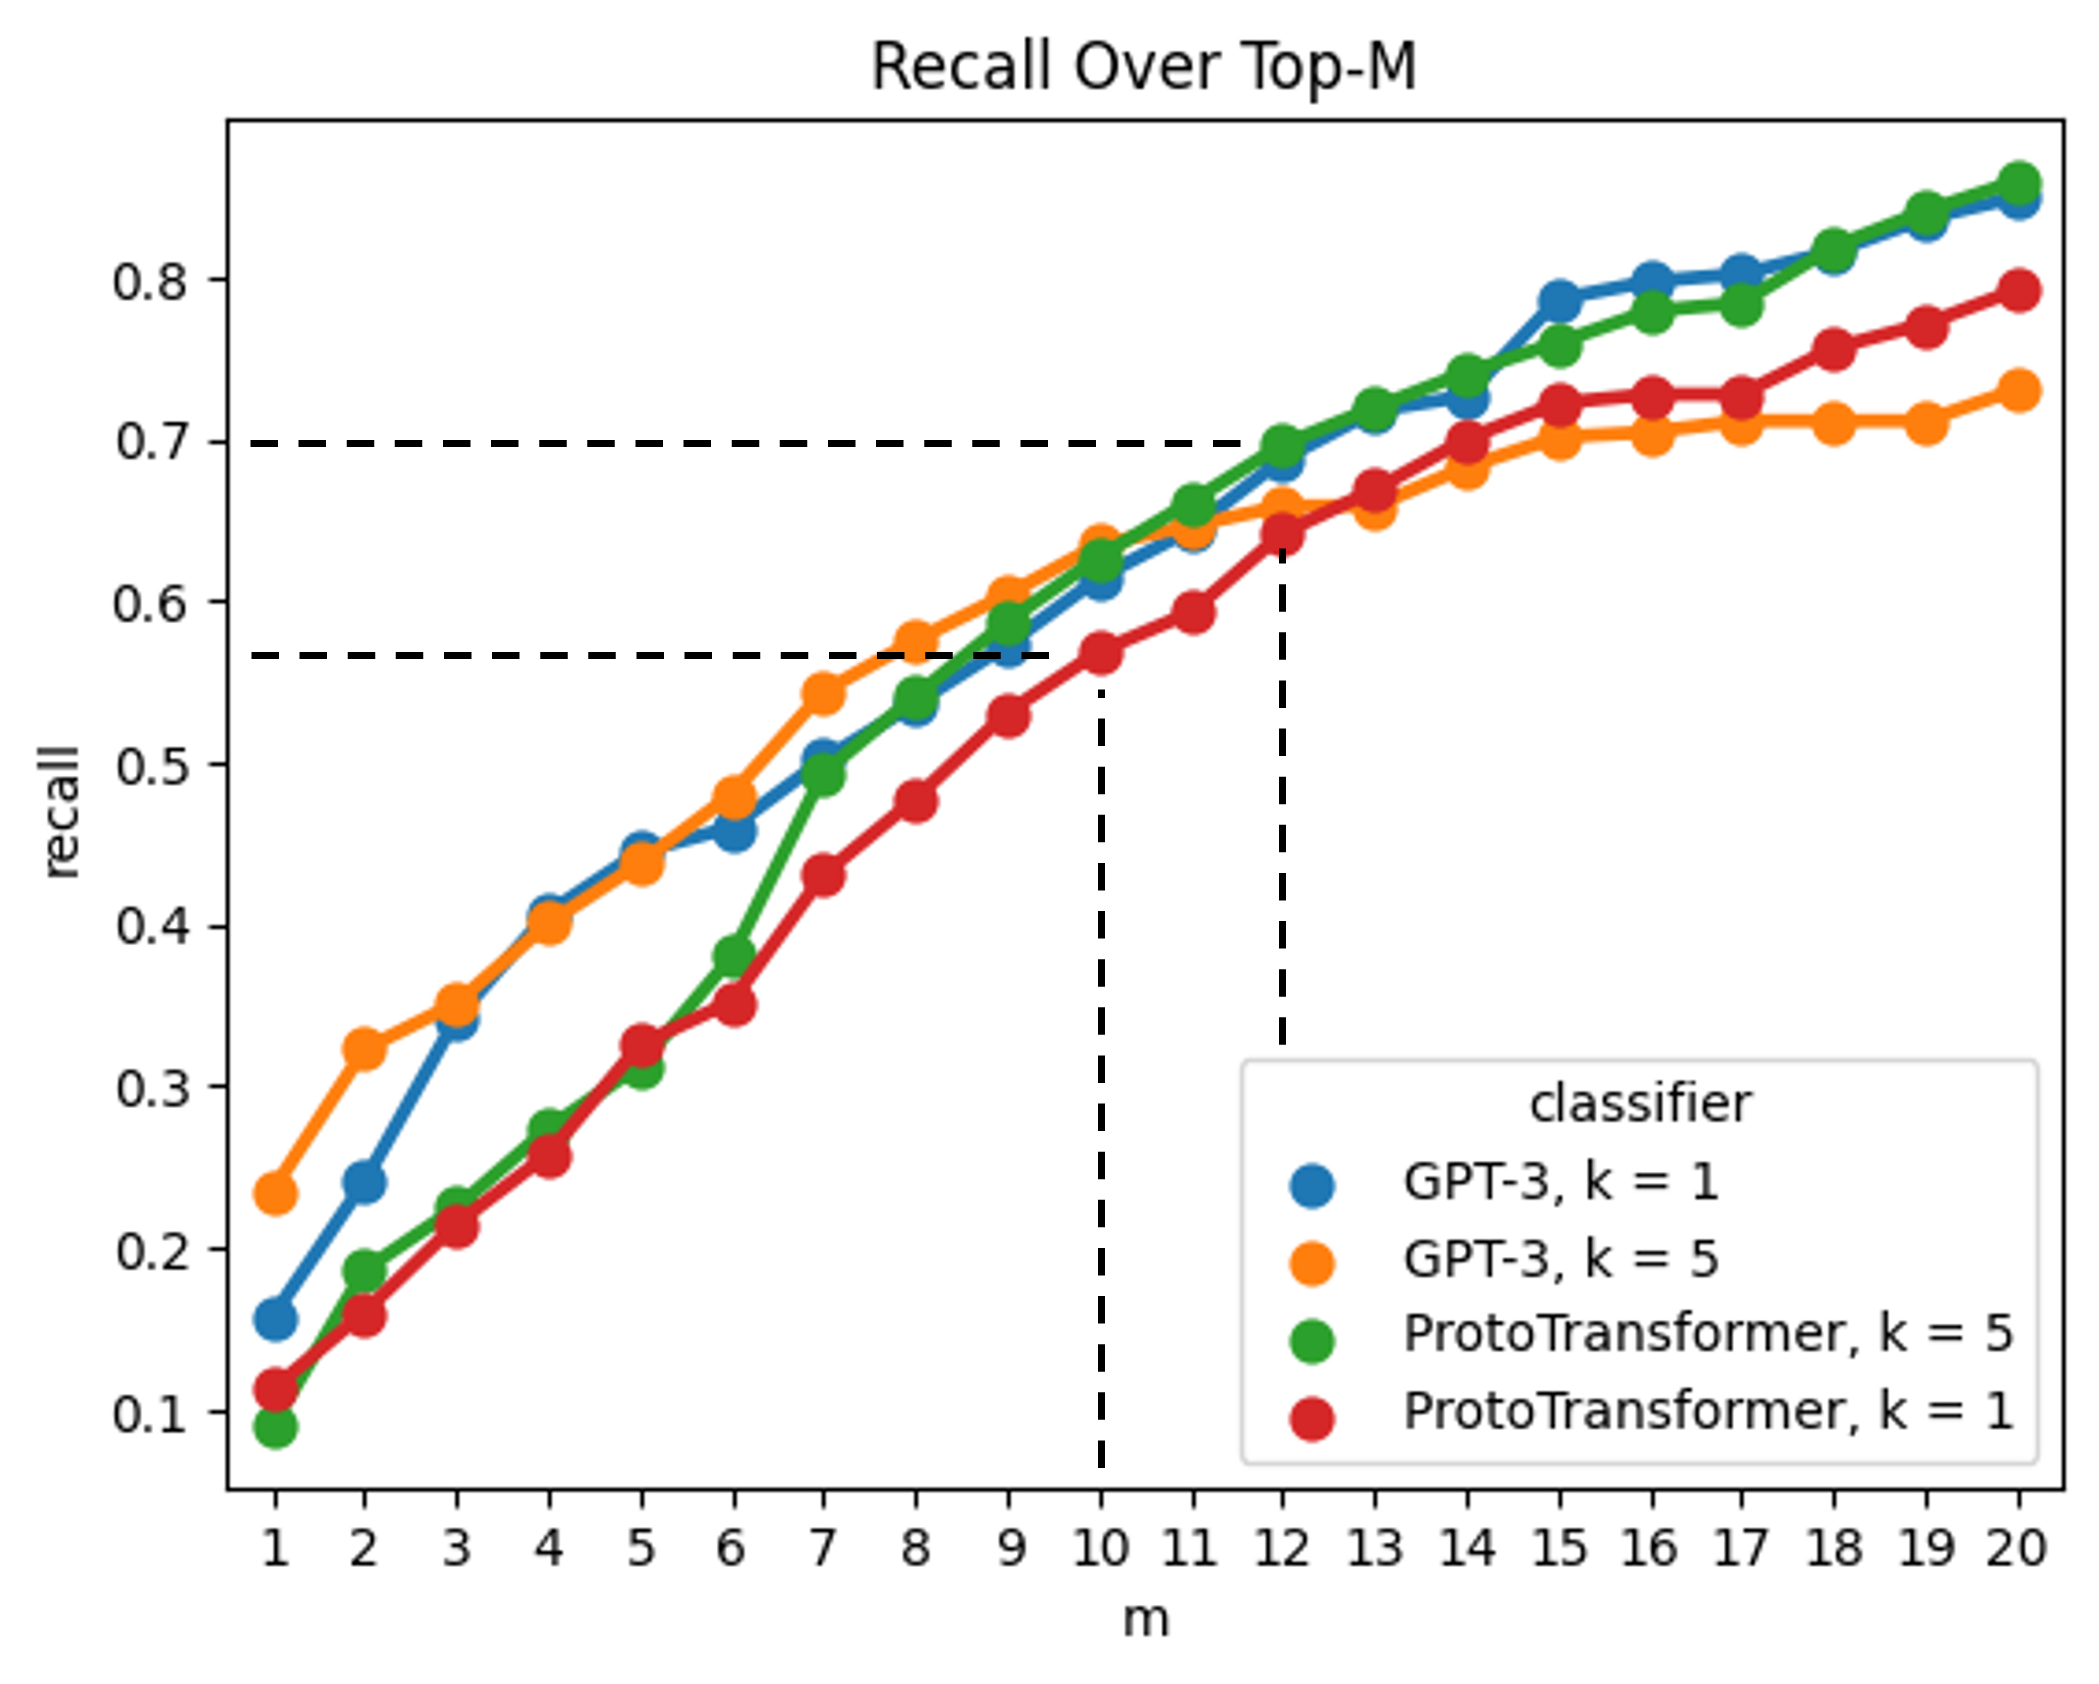 Graph labeled recall on the y-axis and m on the x-axis. An orange line labeled GPT-3 k = 5 is highest between m 1 and 10, increasing from recall at 0.25 to 0.65. From m = 10 onward, a green line labeled ProtoTransformer k = 5 is the highest, increasing from recall at 0.7 to 0.9.